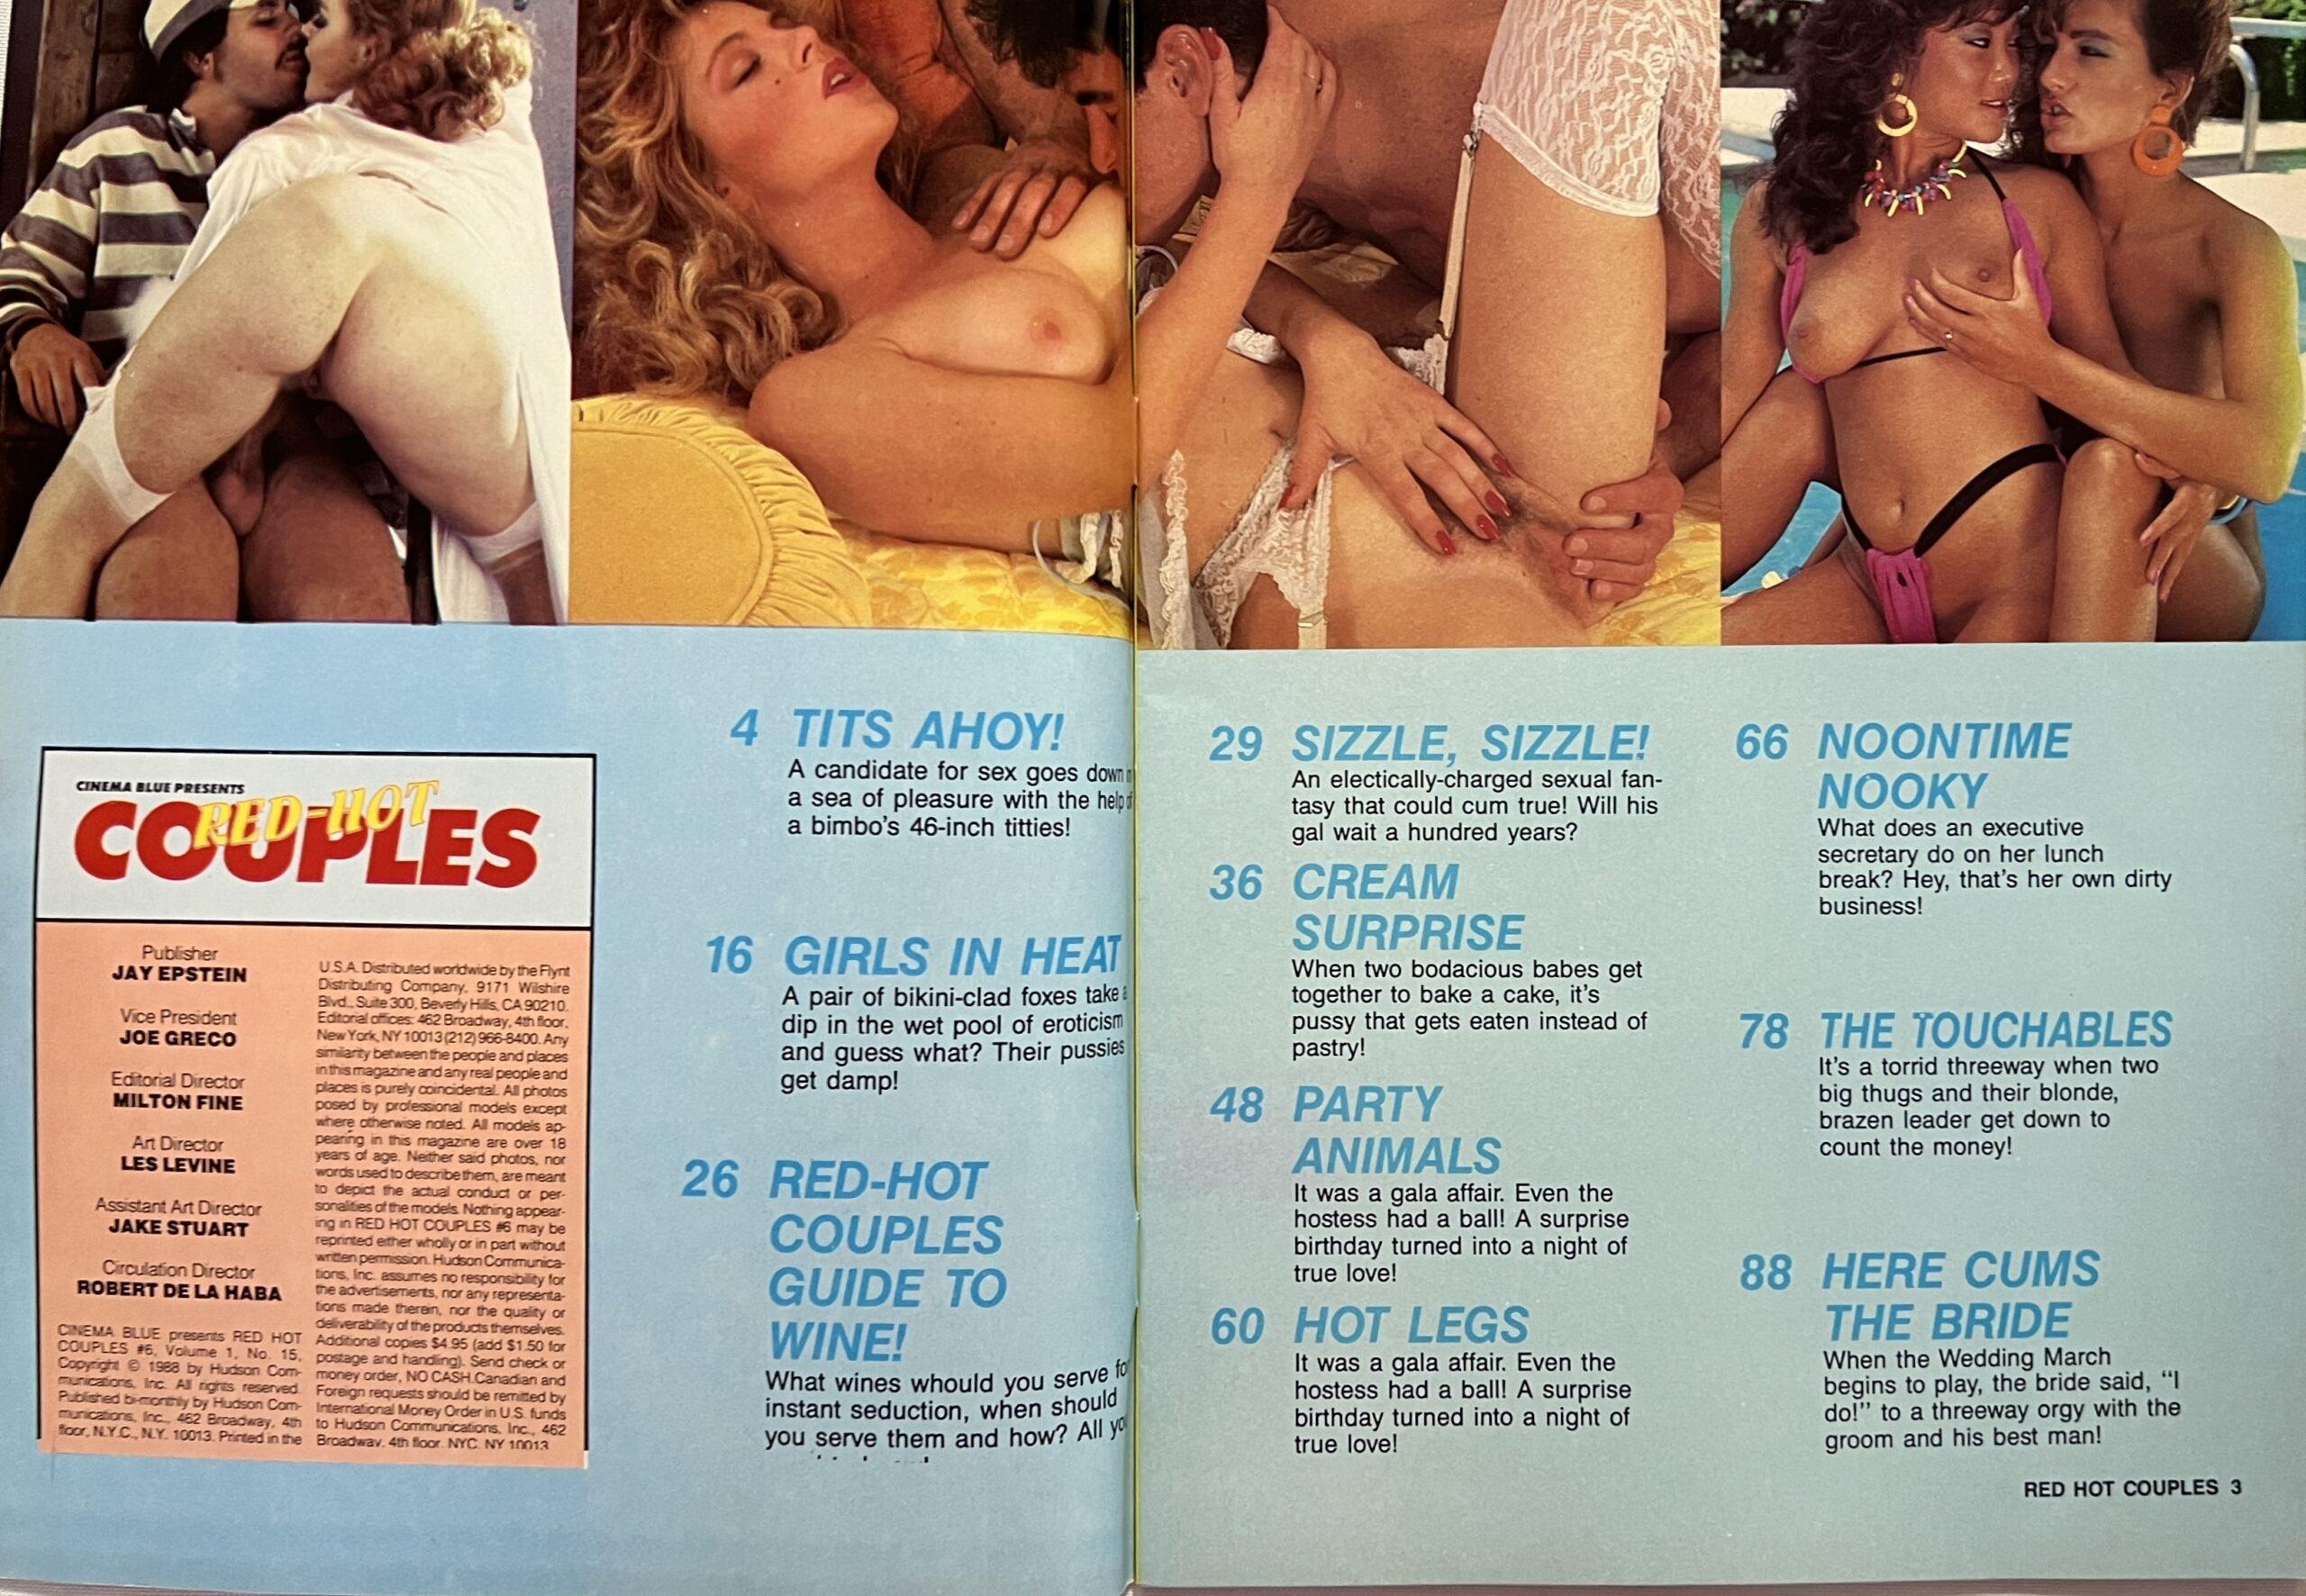 Red Hot Couples 1/15 1988 *Cinema Blue*